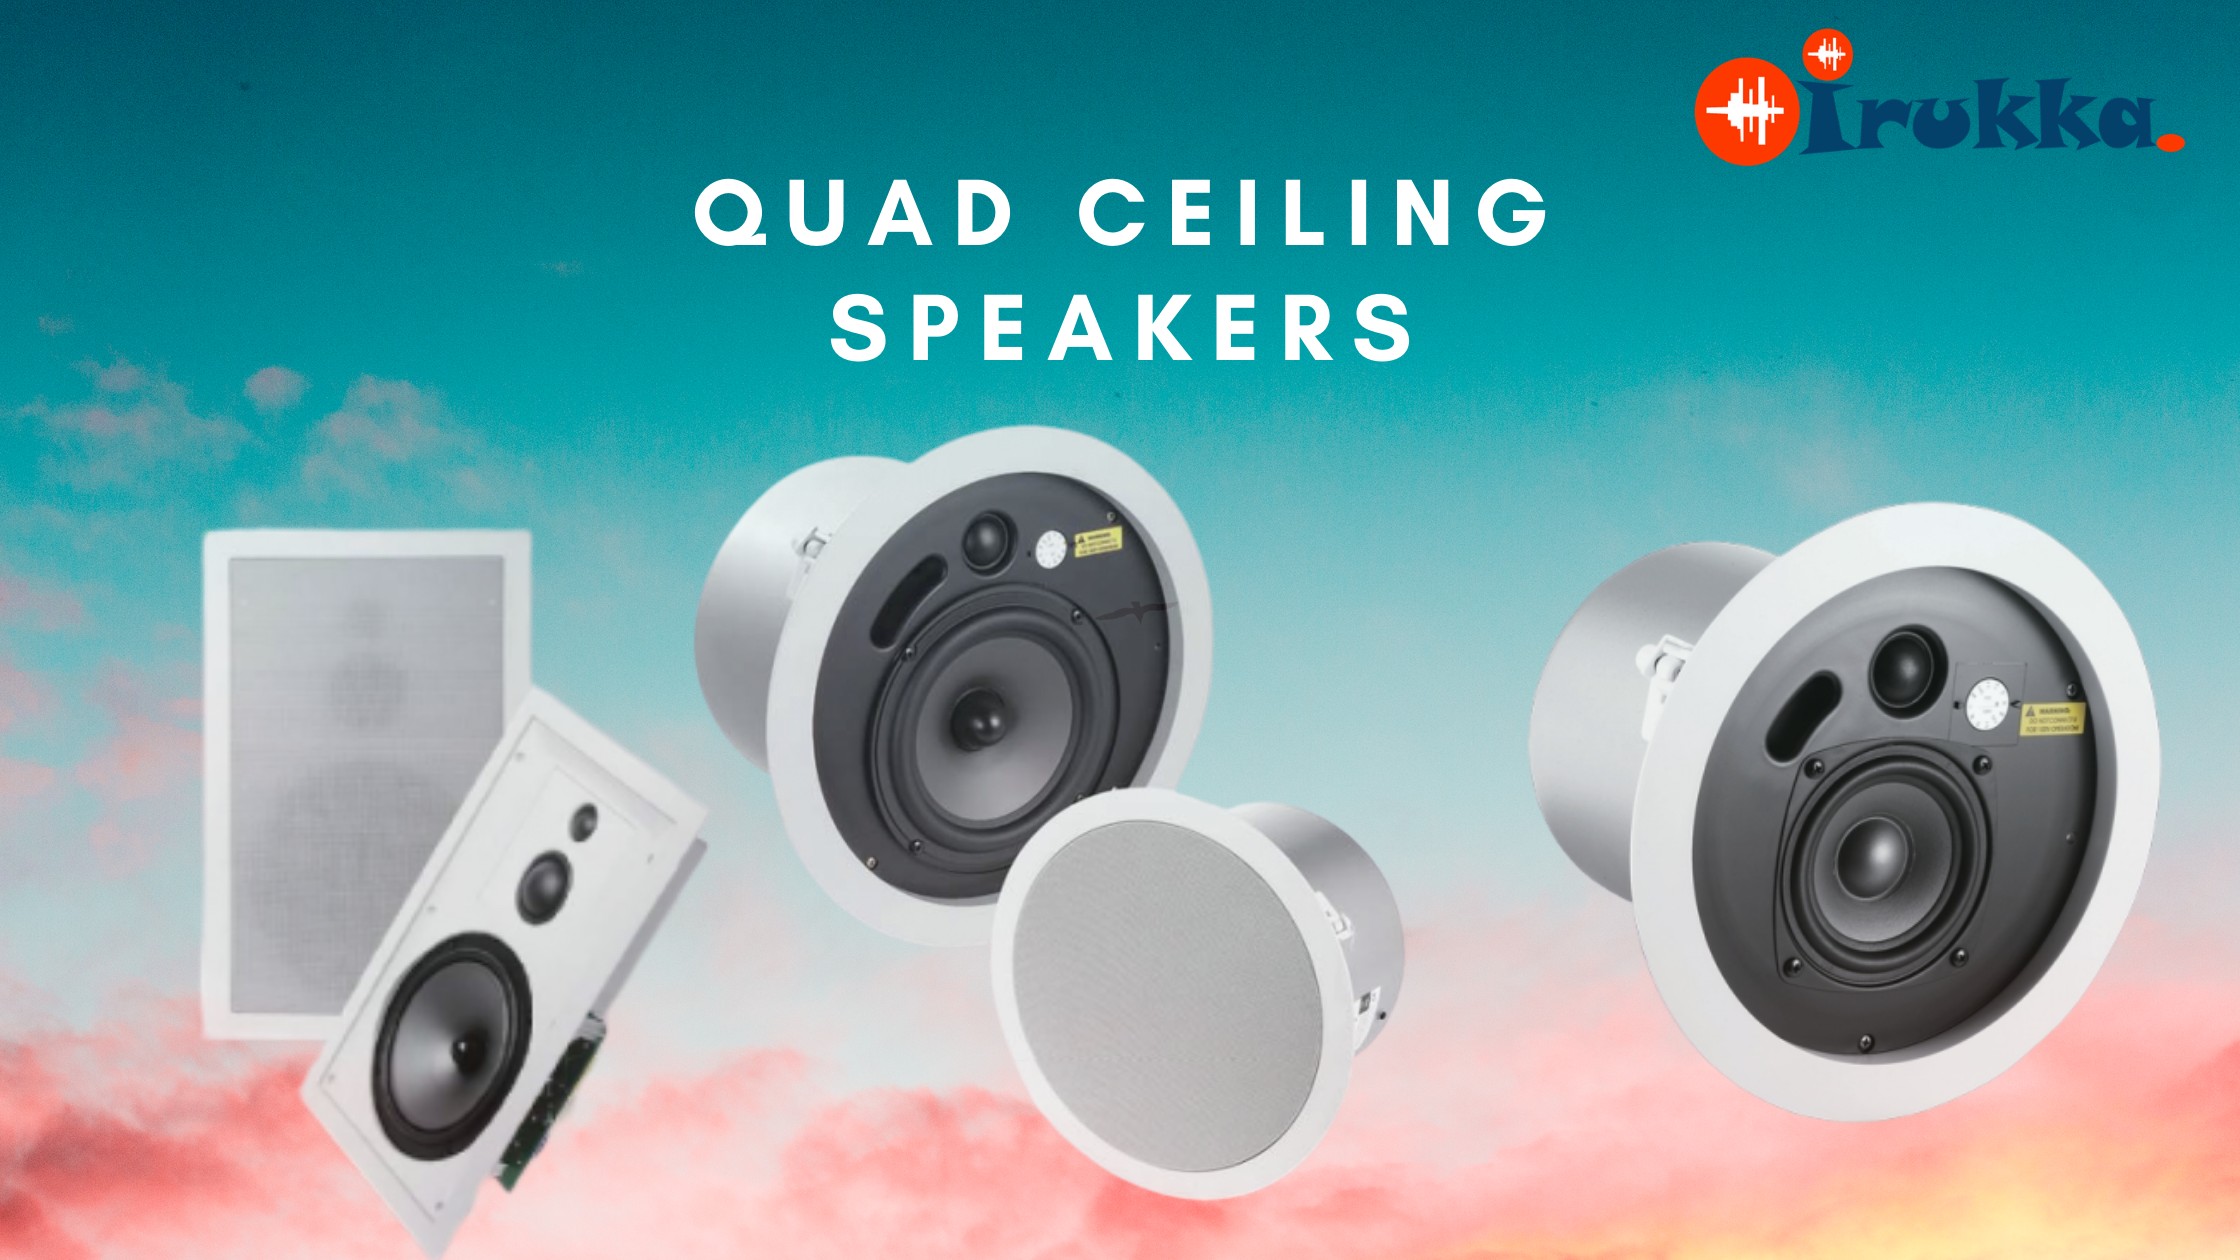 10 YEARS WARRANTY ON QUAD CEILING SPEAKERS IN NIGERIA ✓ buy ceiling speakers in Nigeria with 10 years warranty with free delivery in Lagos ✓